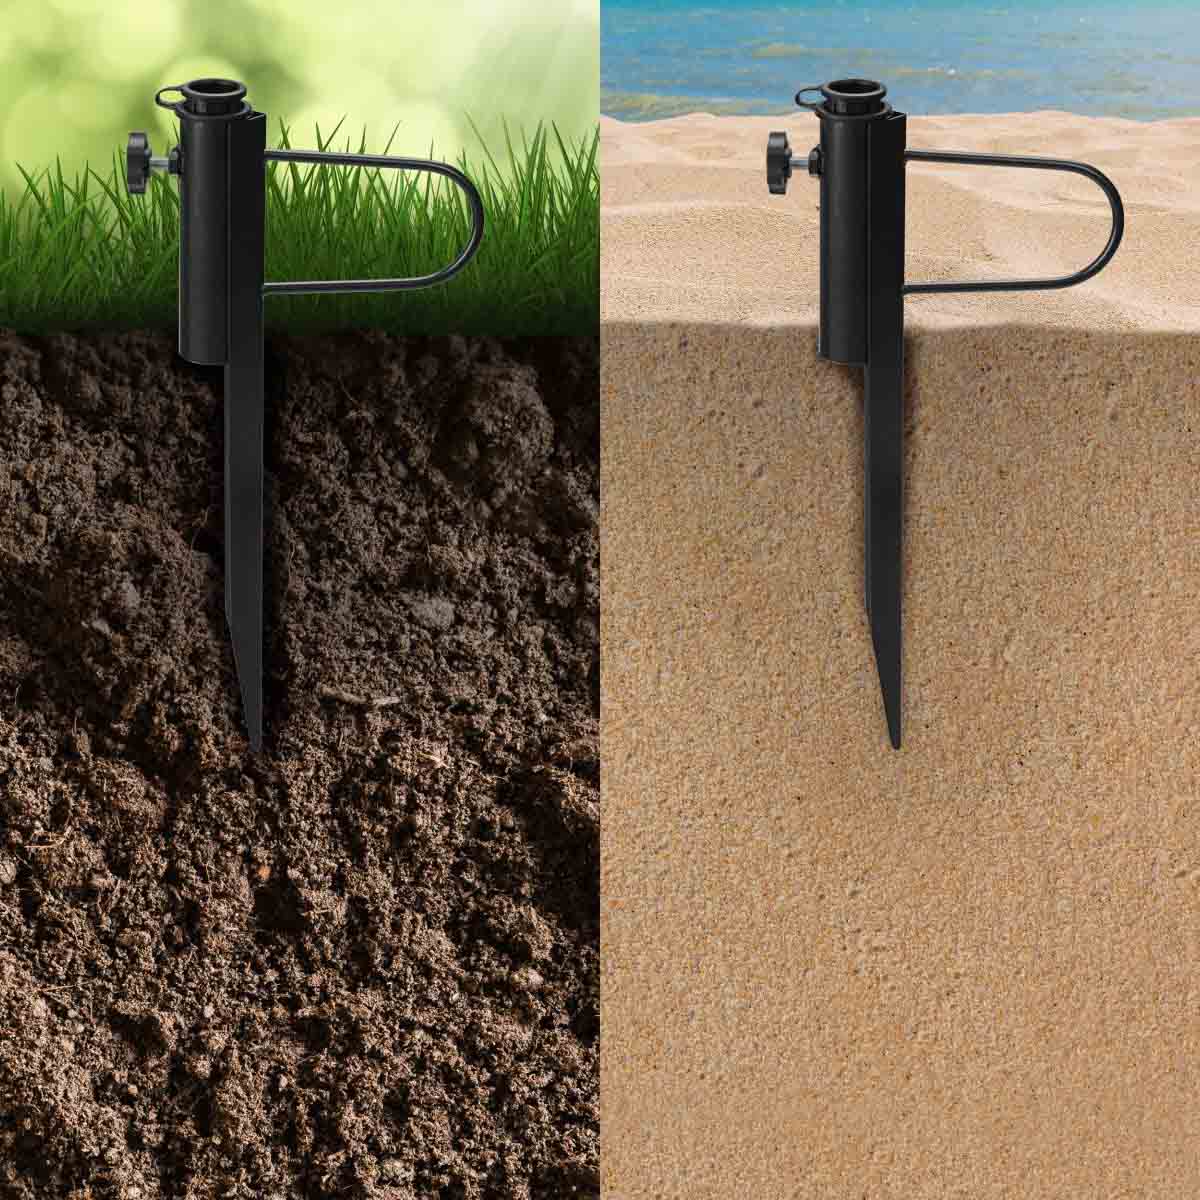 Heavy Duty Steel Beach Umbrella Sand Anchor could be used either in sand or on the ground